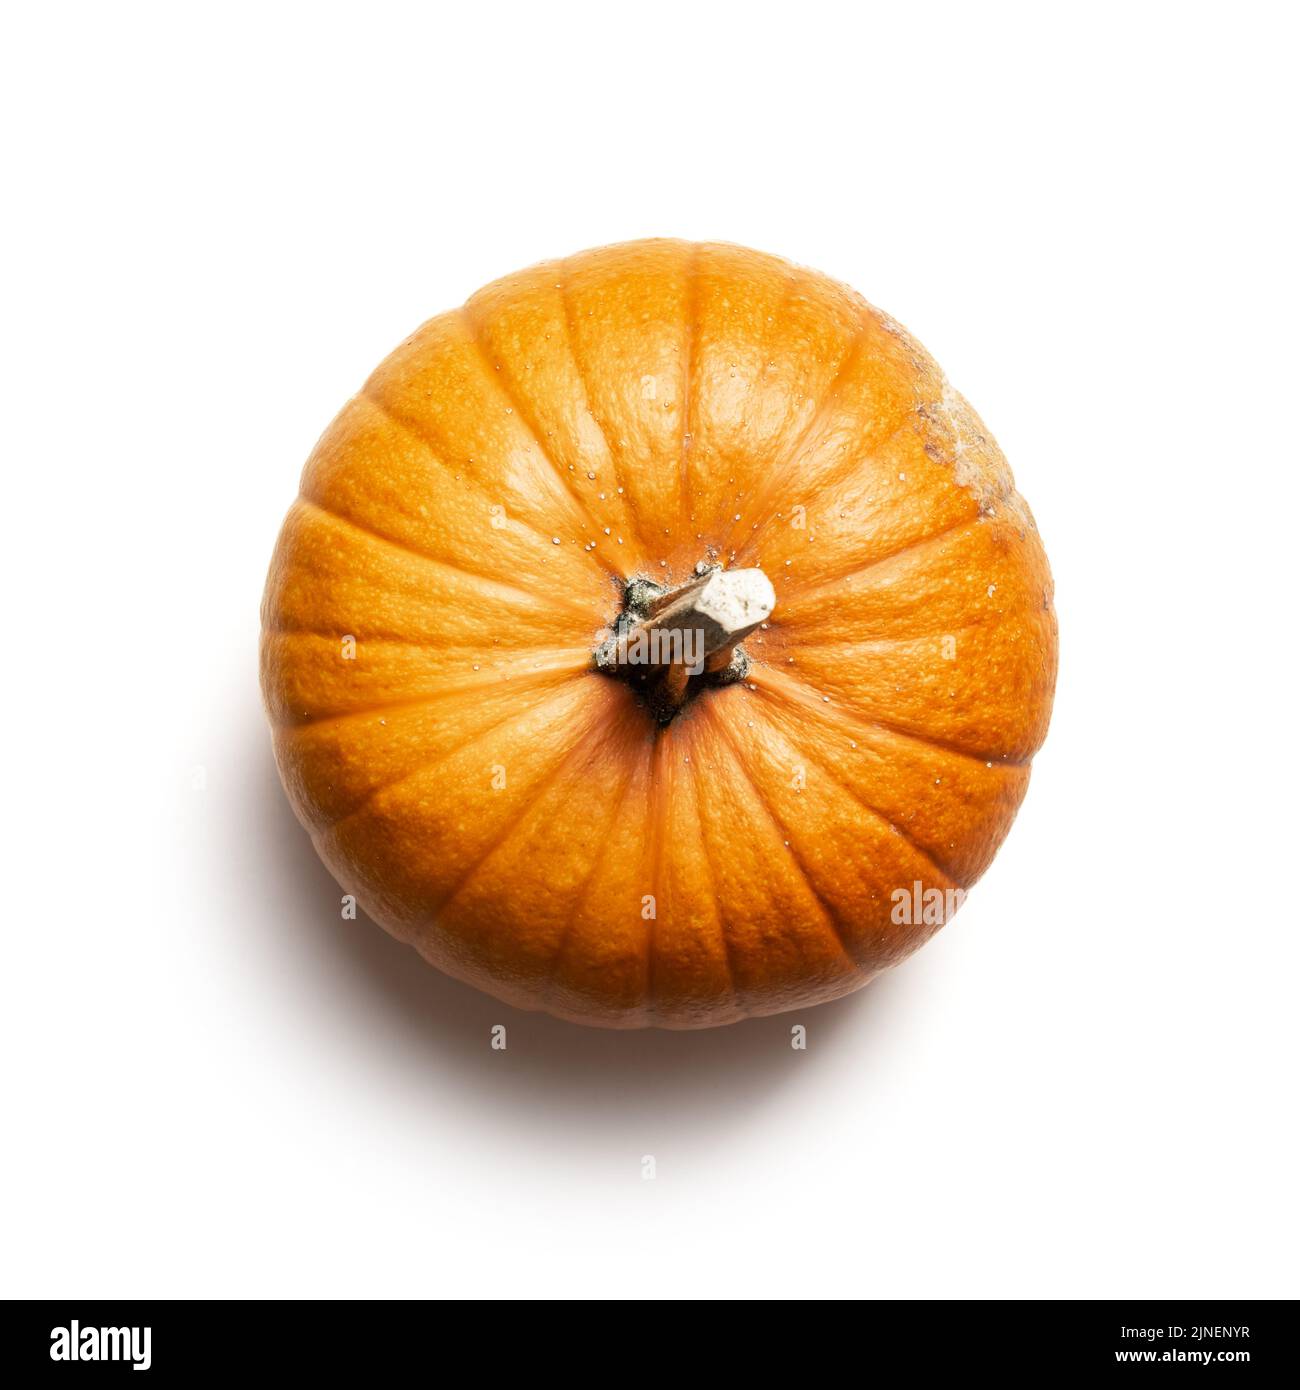 Orange pumpkin isolated on white background. Food photography. Halloween concept. Top view. Part of set different kinds of pumpkins. Stock Photo